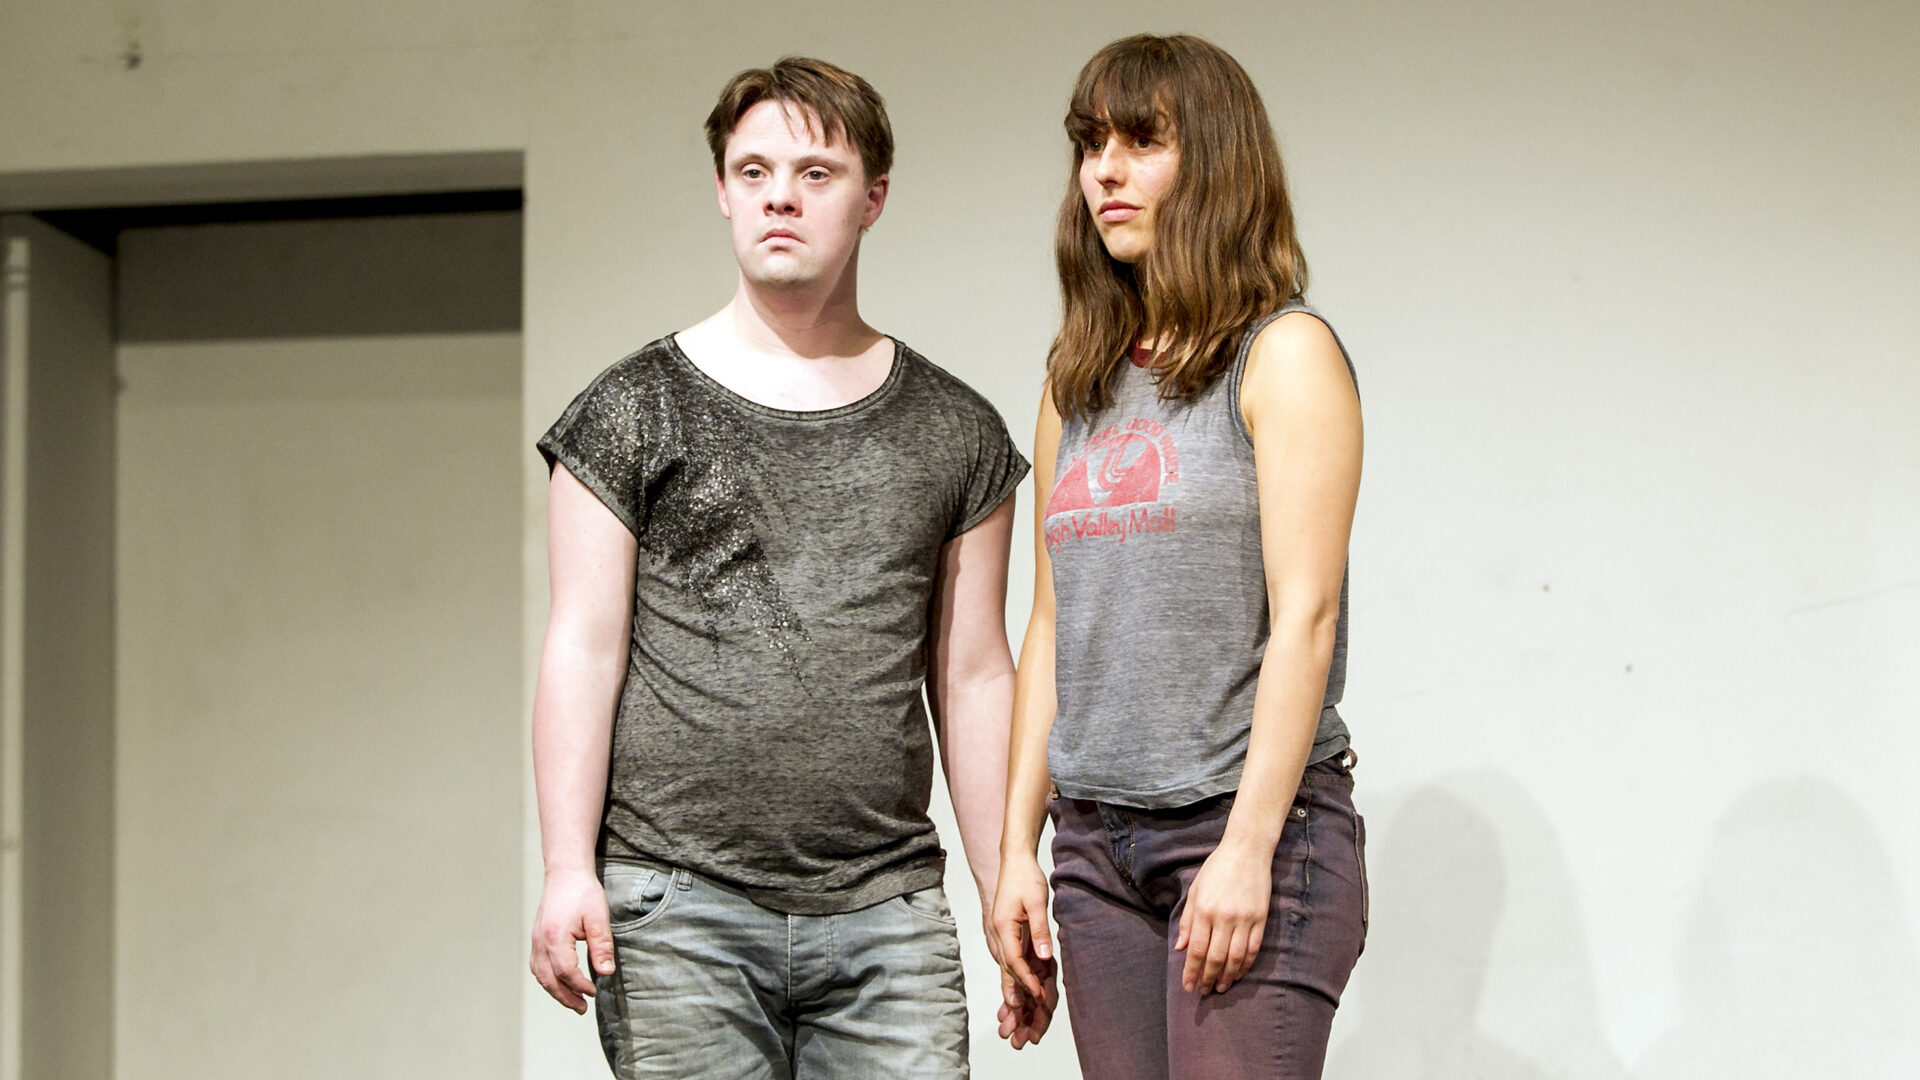 Scene photo of a performance: a man and a woman next to eachother on the stage. They are looking in the direction of the audience.